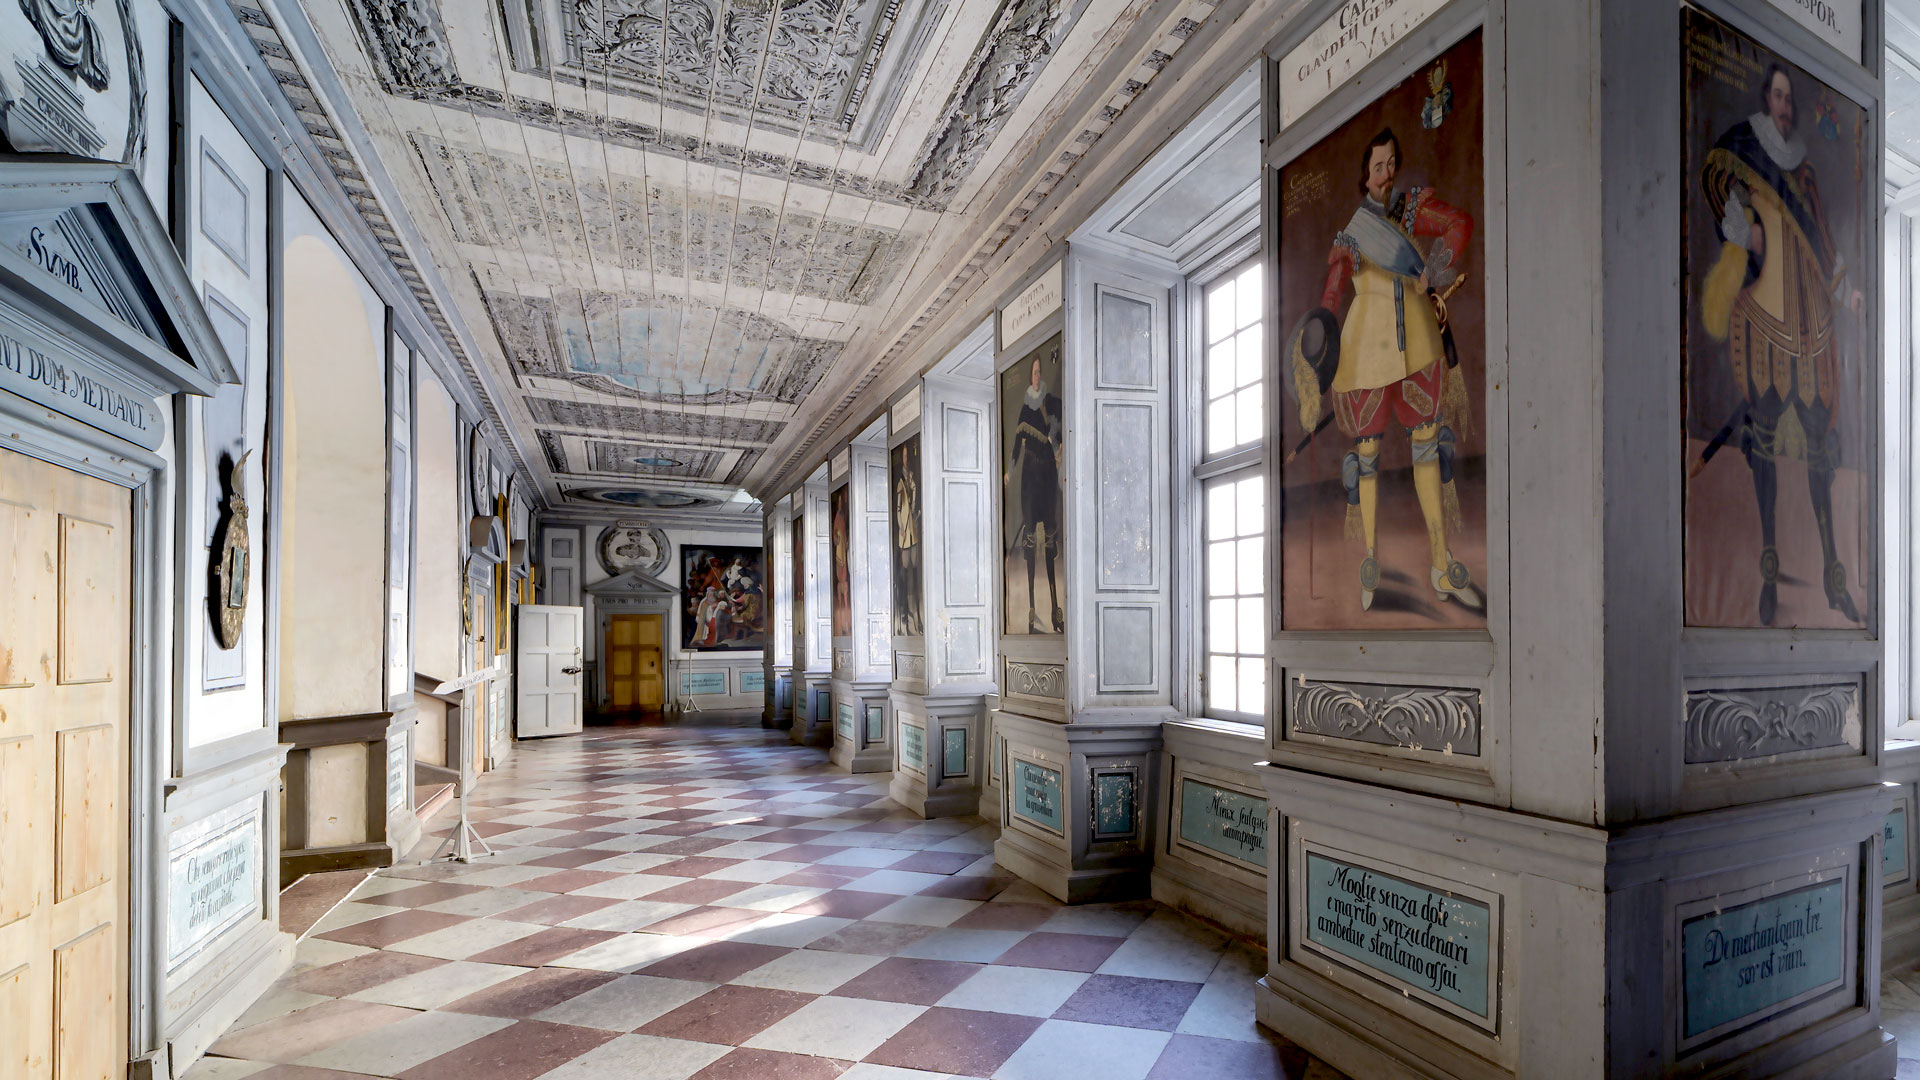 A corridor with chess-patterned floor.